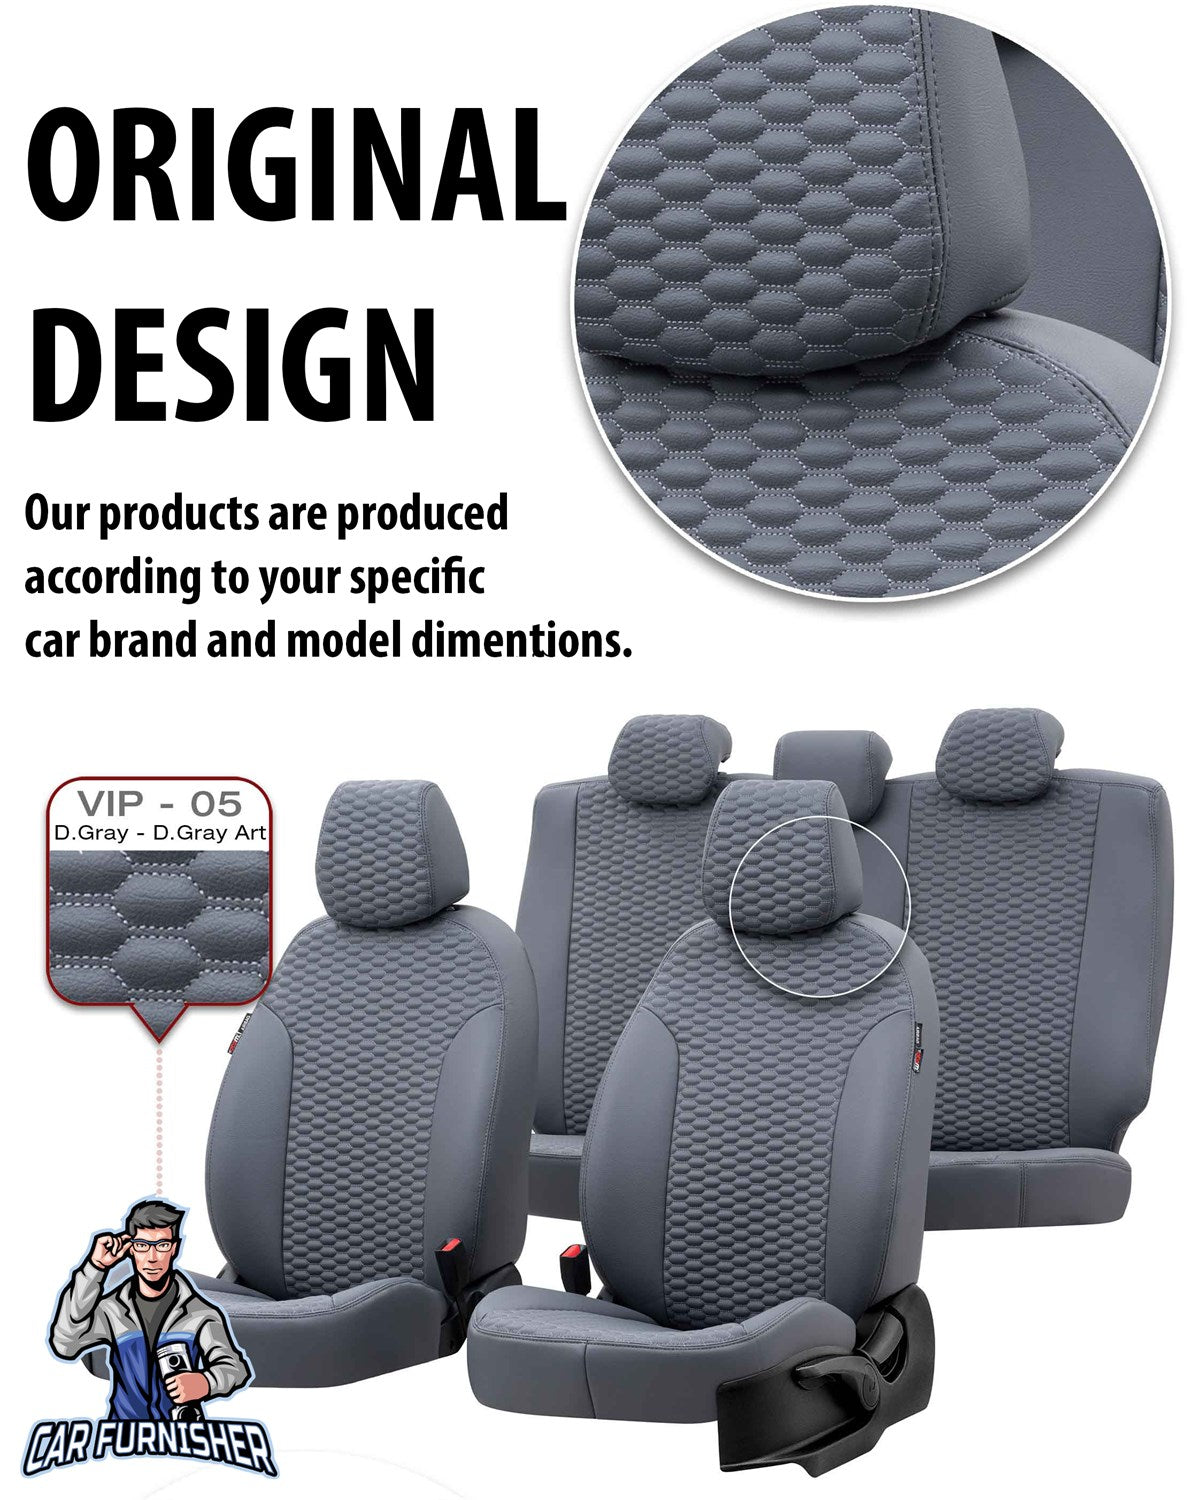 Mitsubishi Colt Seat Covers Tokyo Leather Design Smoked Leather